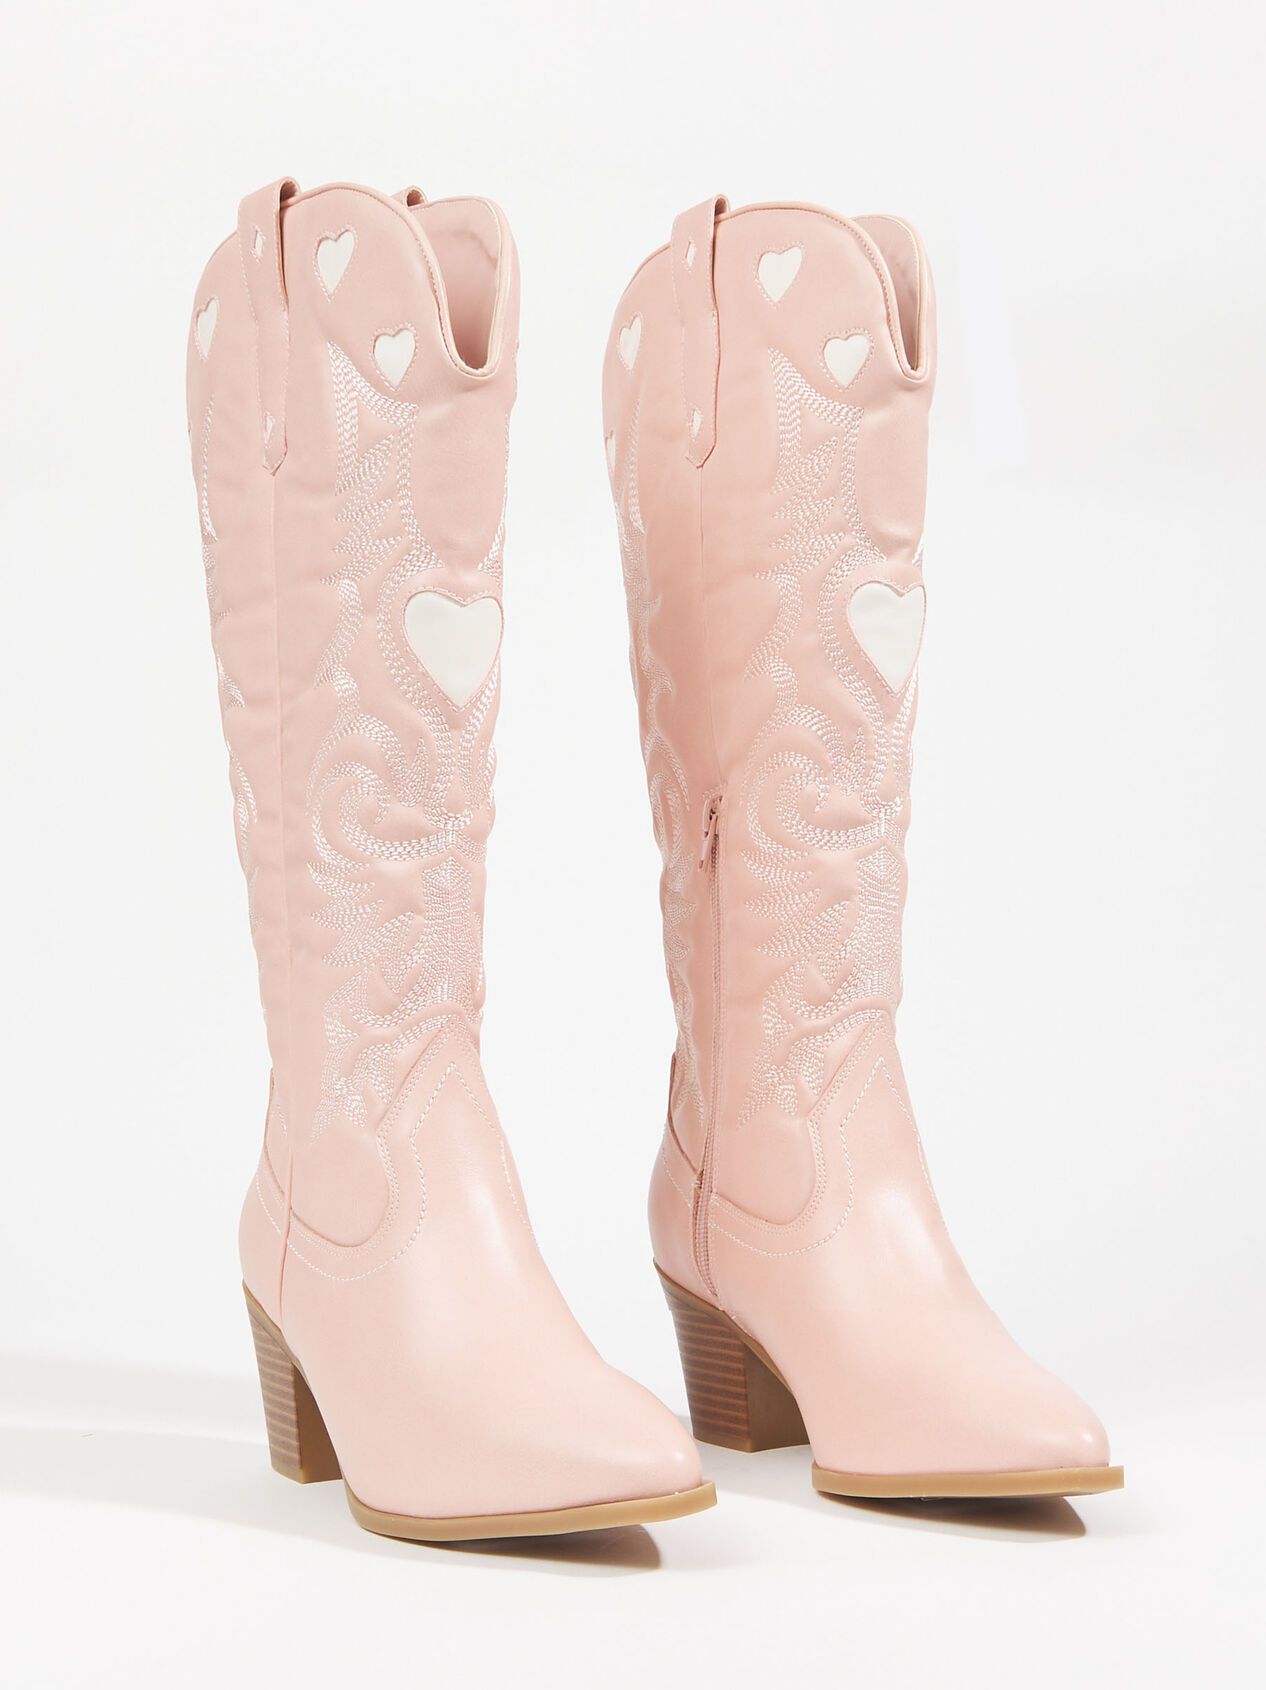 Adore Tall Western Boots | Altar'd State